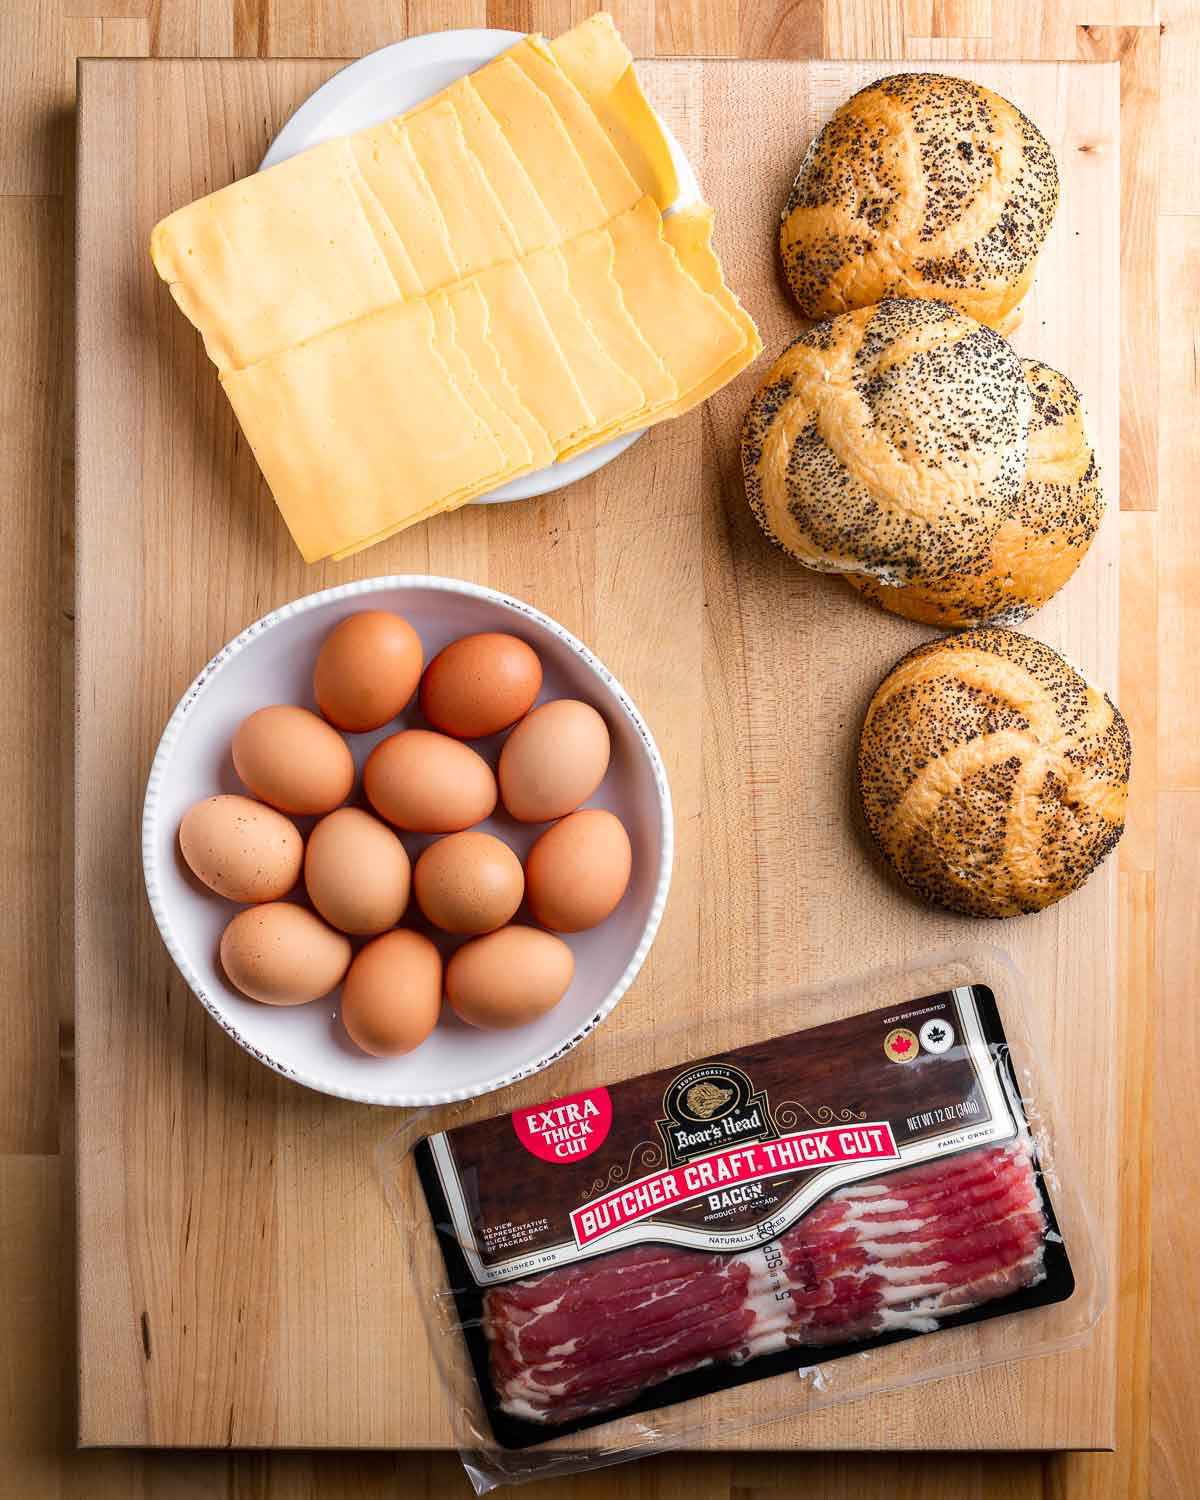 Ingredients shown: American cheese, deli rolls, eggs, and Boar's Head bacon.